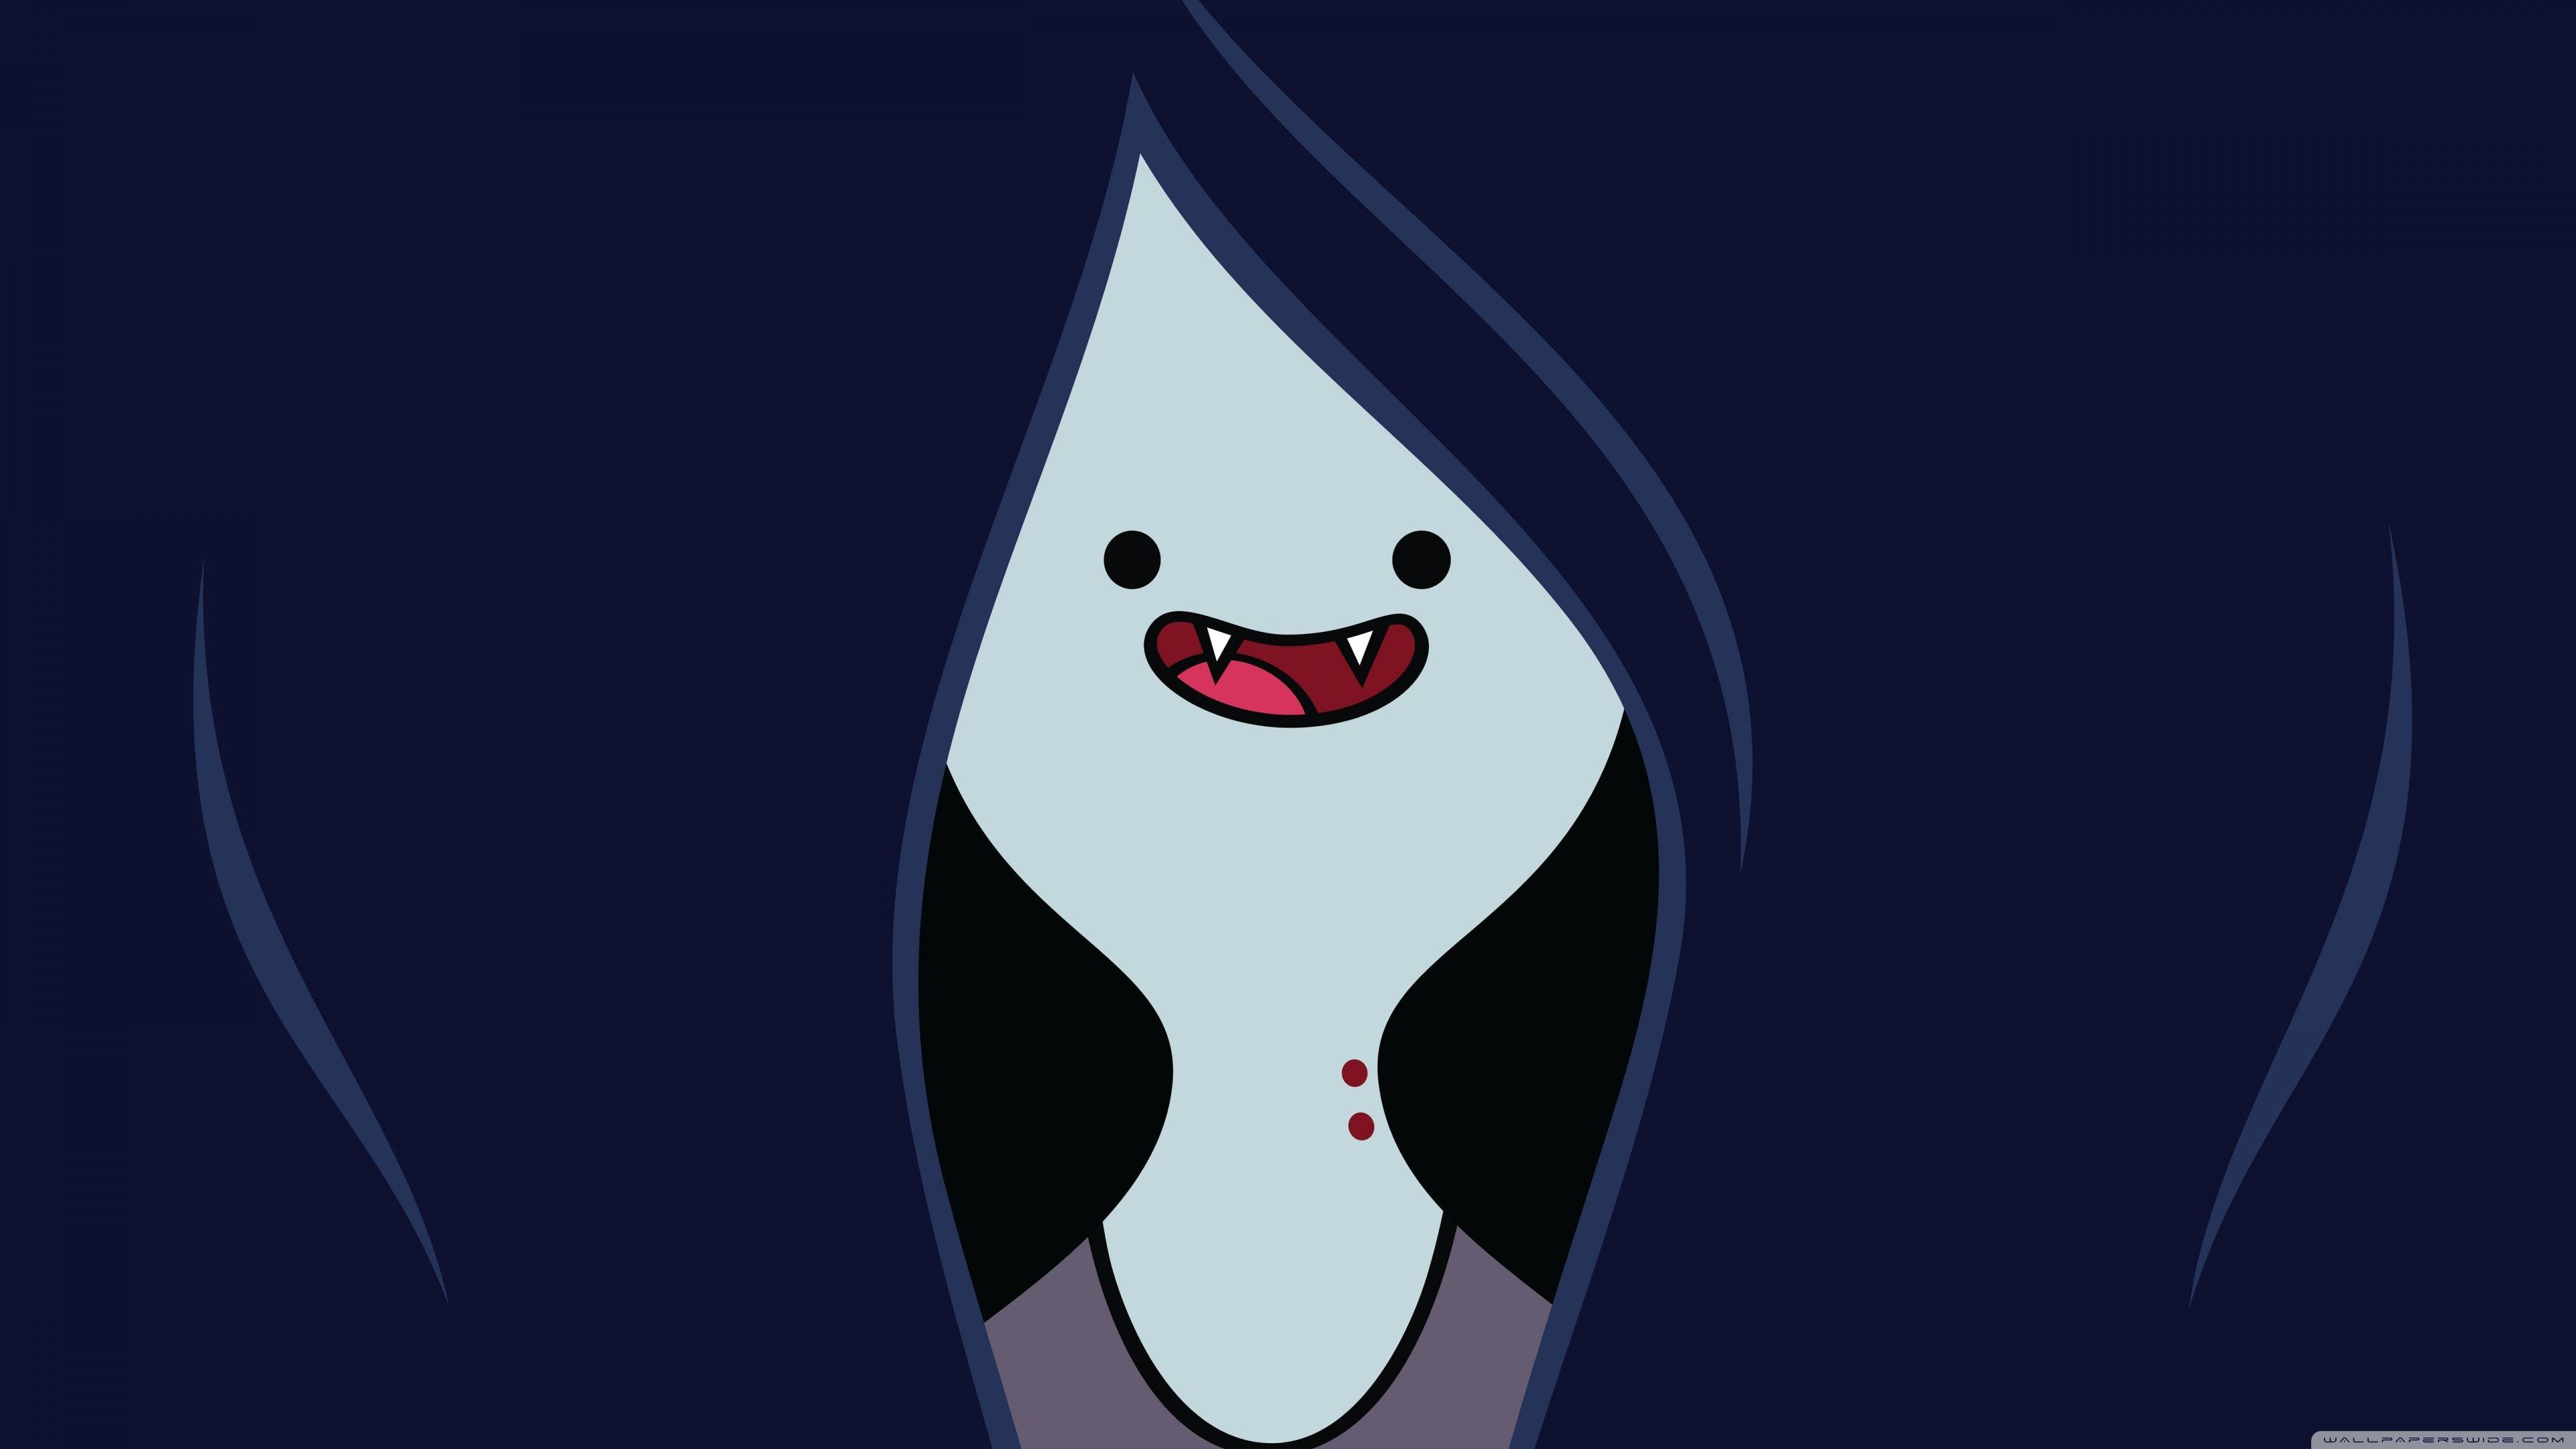 Adventure Time Wallpapers Android - Wallpaper Cave